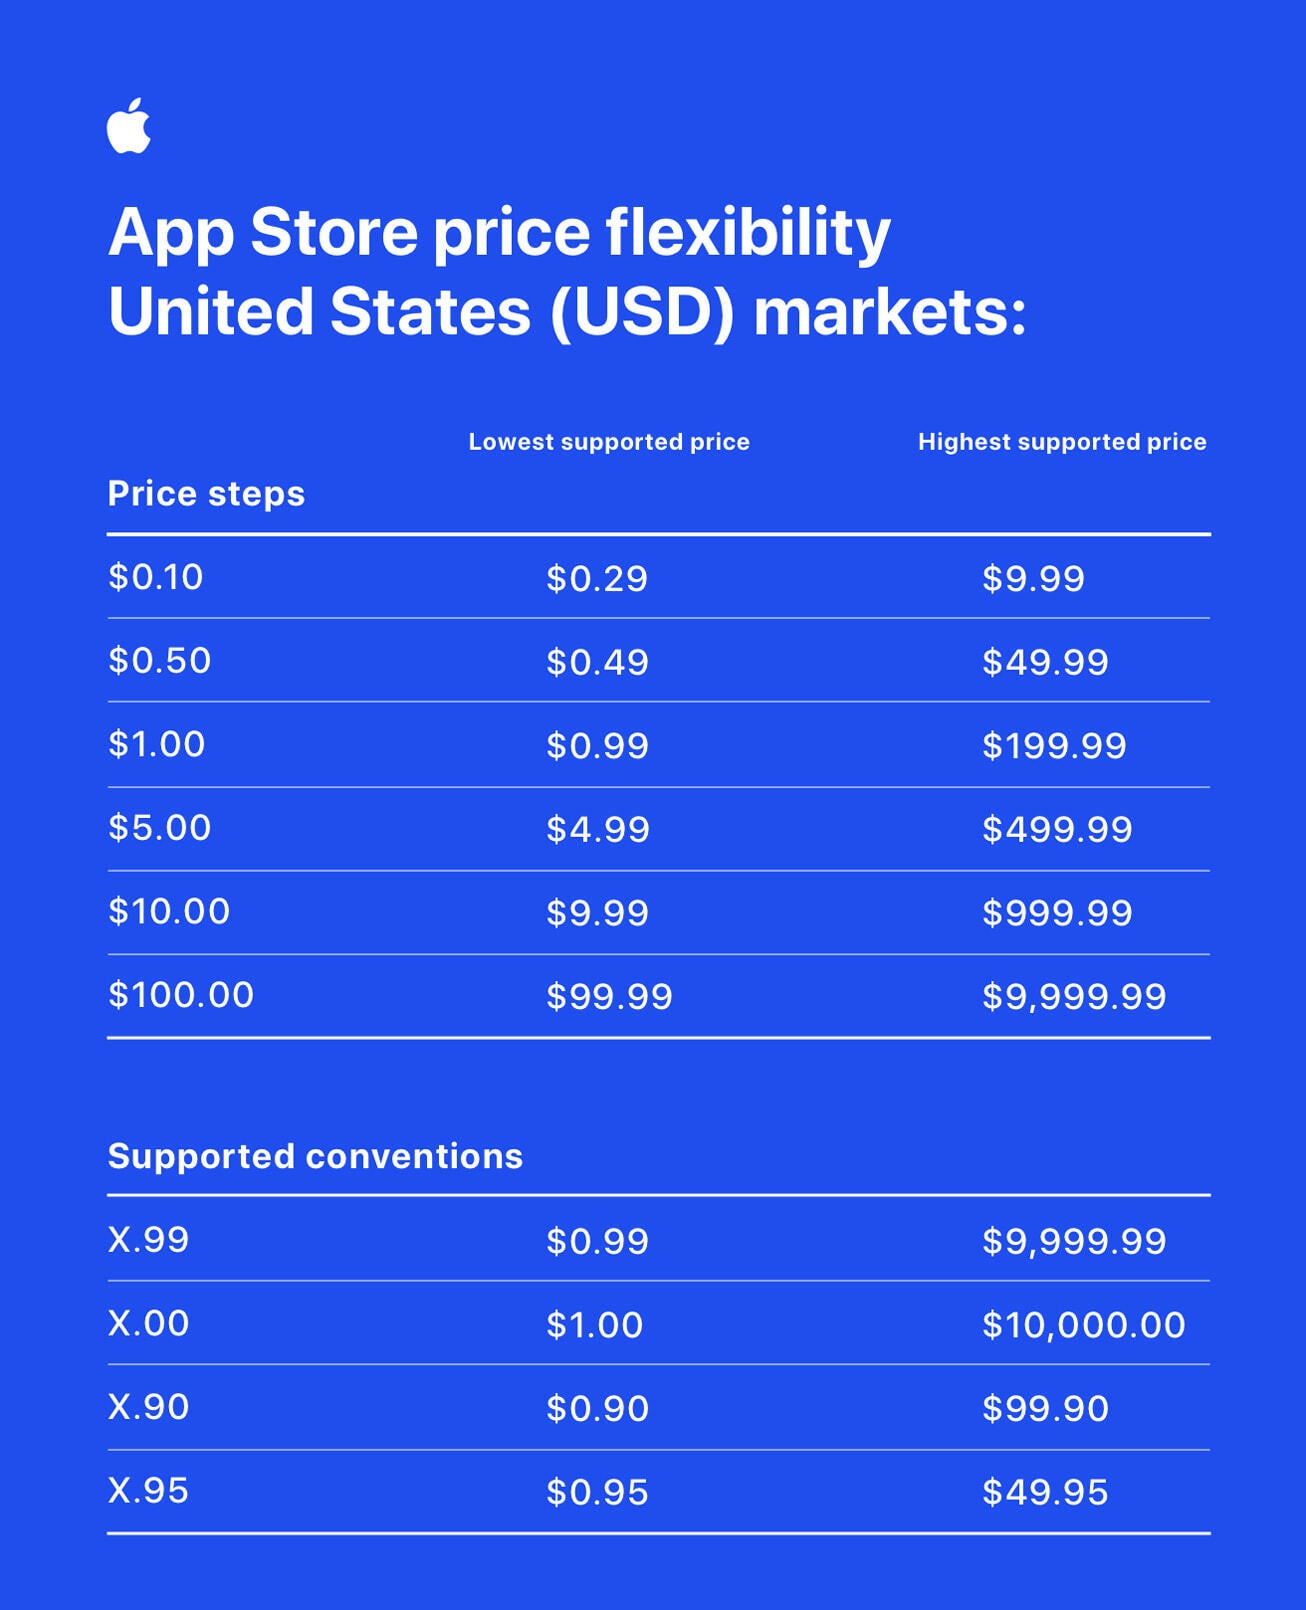 Apple announced new pricing flexibility for the App Store: Apple makes big changes to App Store pricing and adds 700 new price points